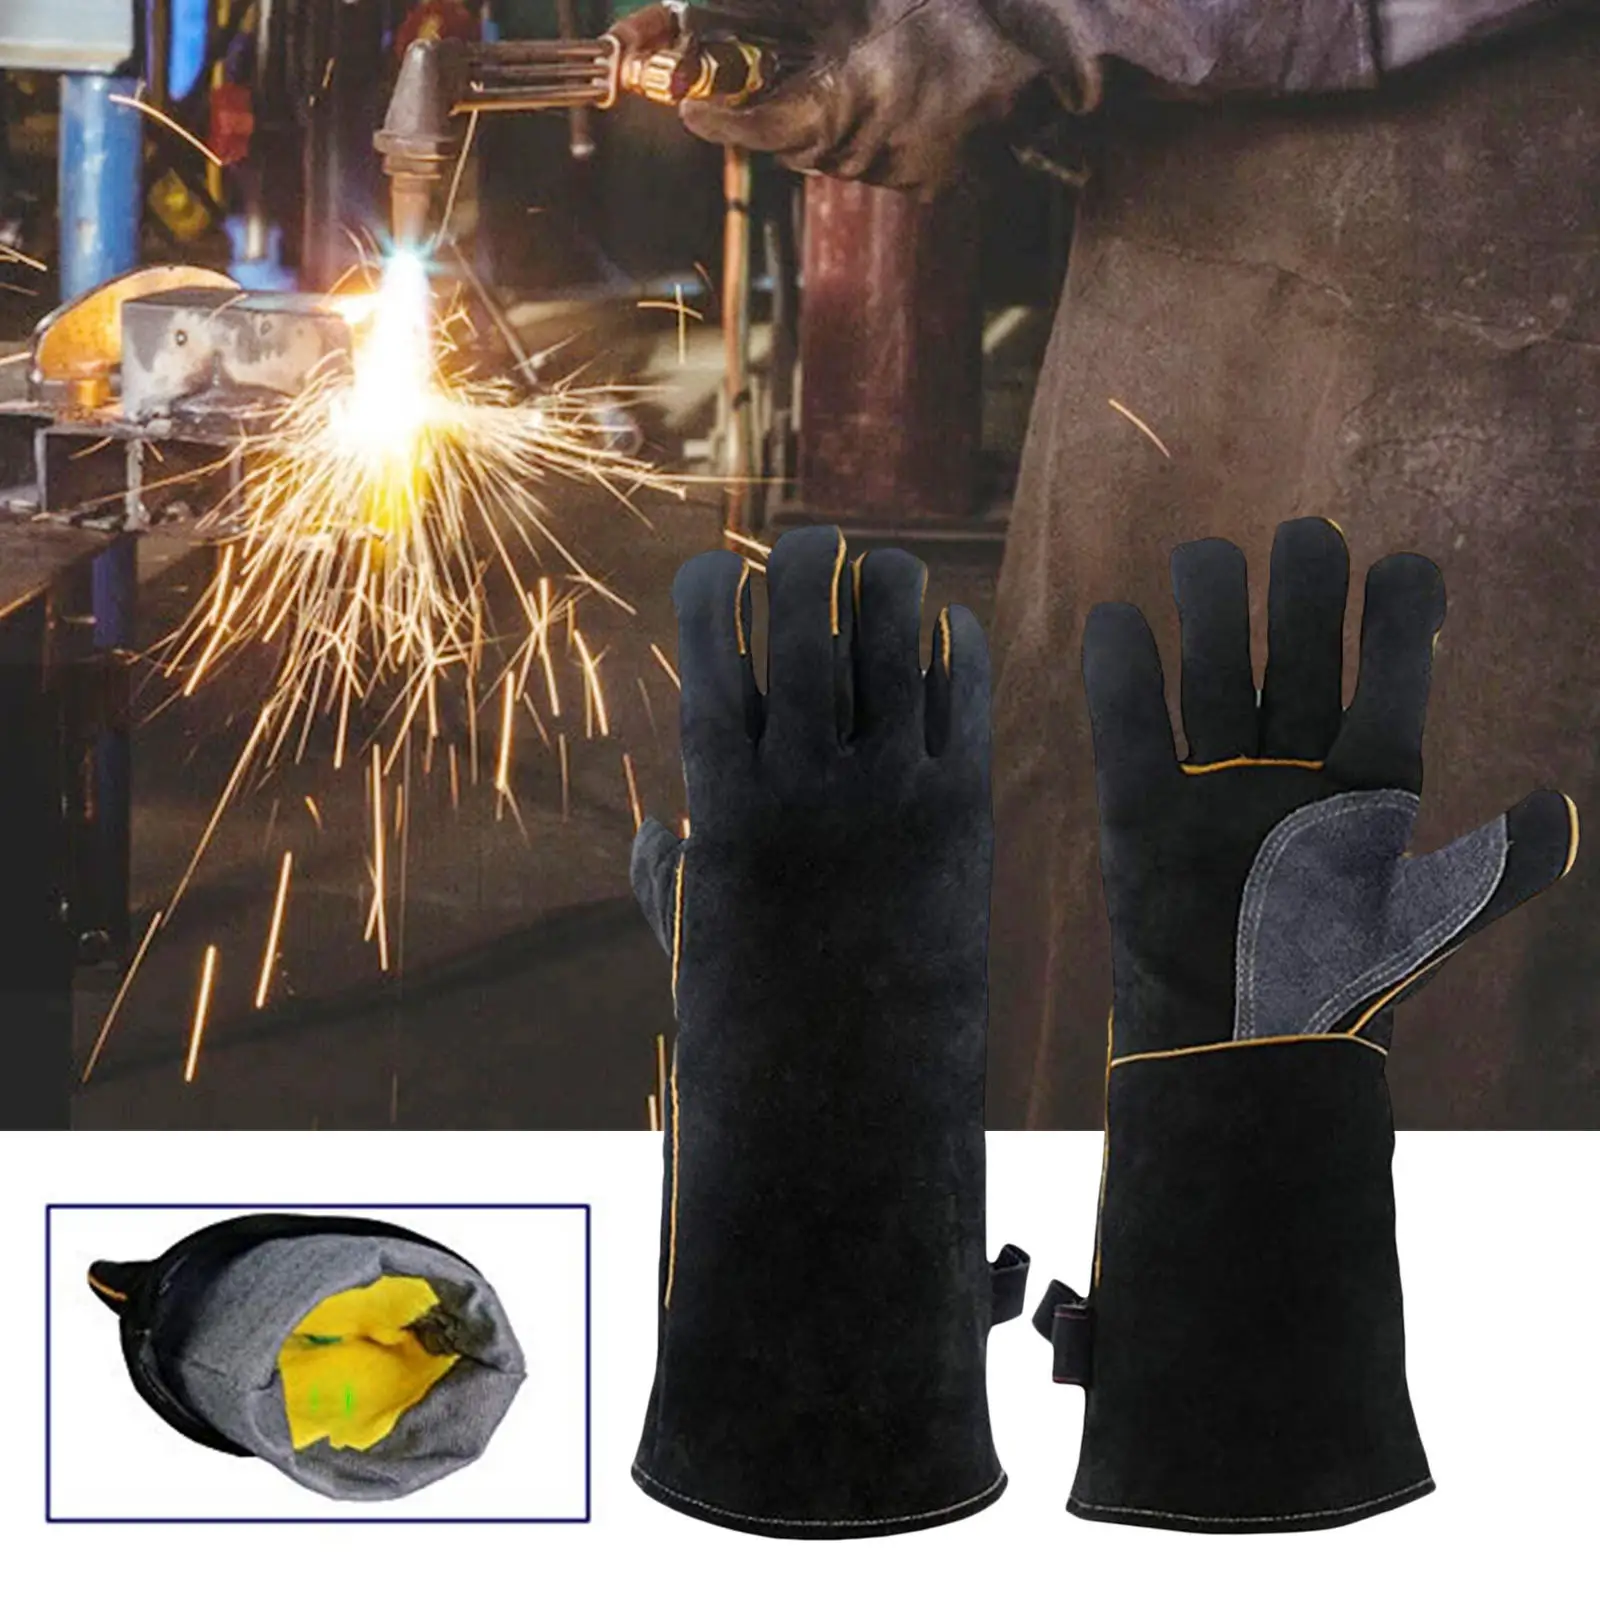 Heat Resistant BBQ Grill Gloves 16 inch Oven Mitts for Furnace Kitchen Cooking Pot Holder